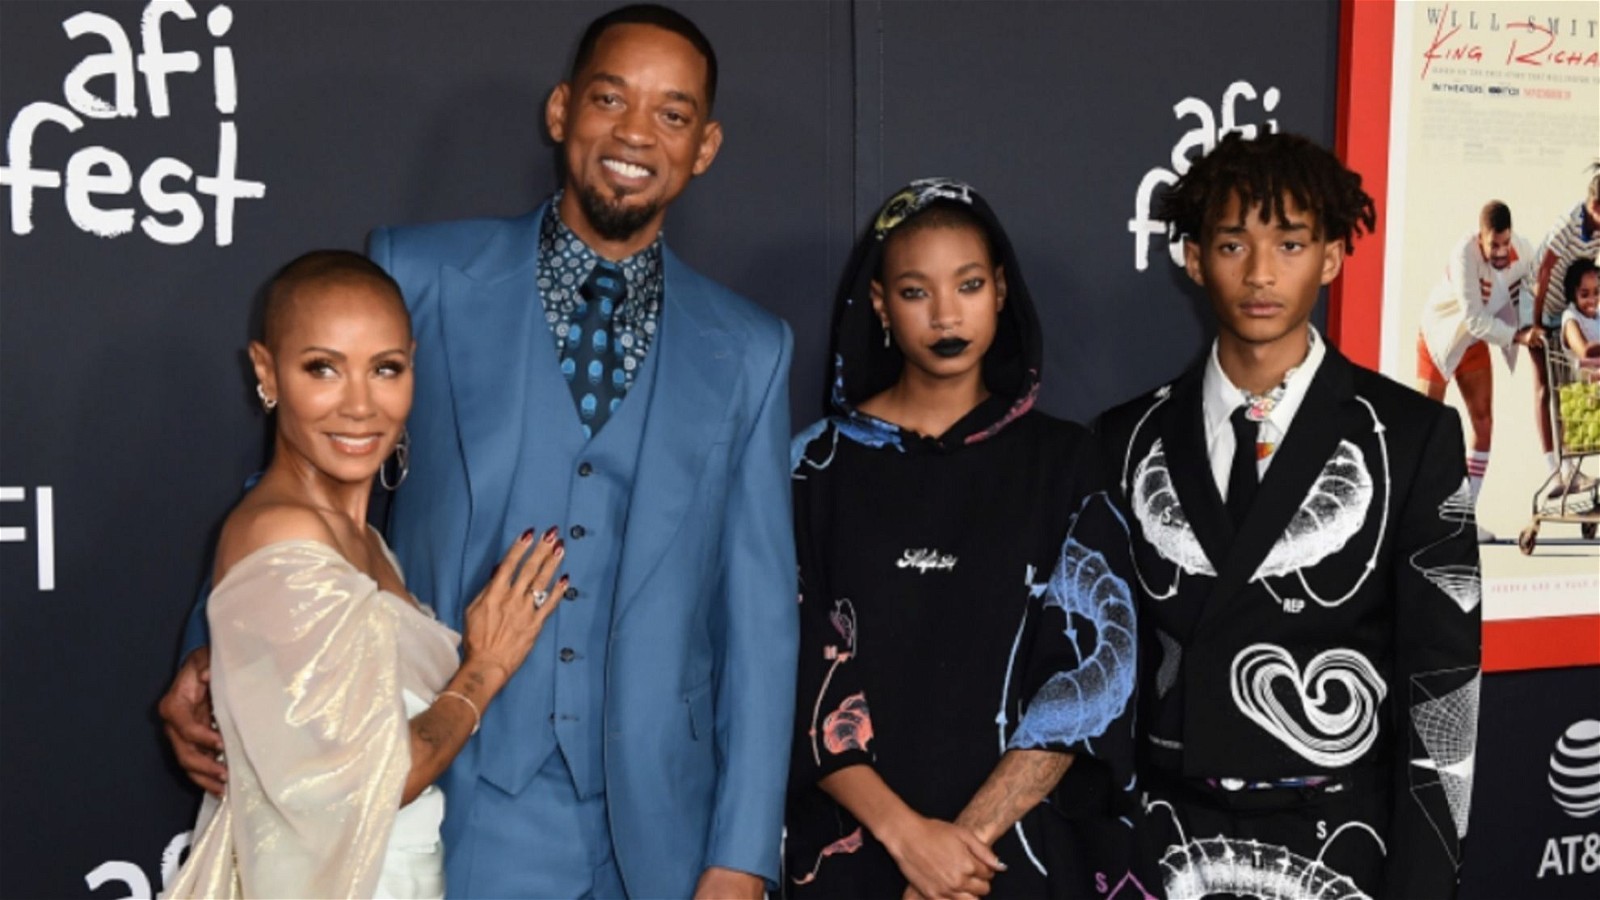 Will Smith with his wife Jada Smith and children Jaden and Willow Smith